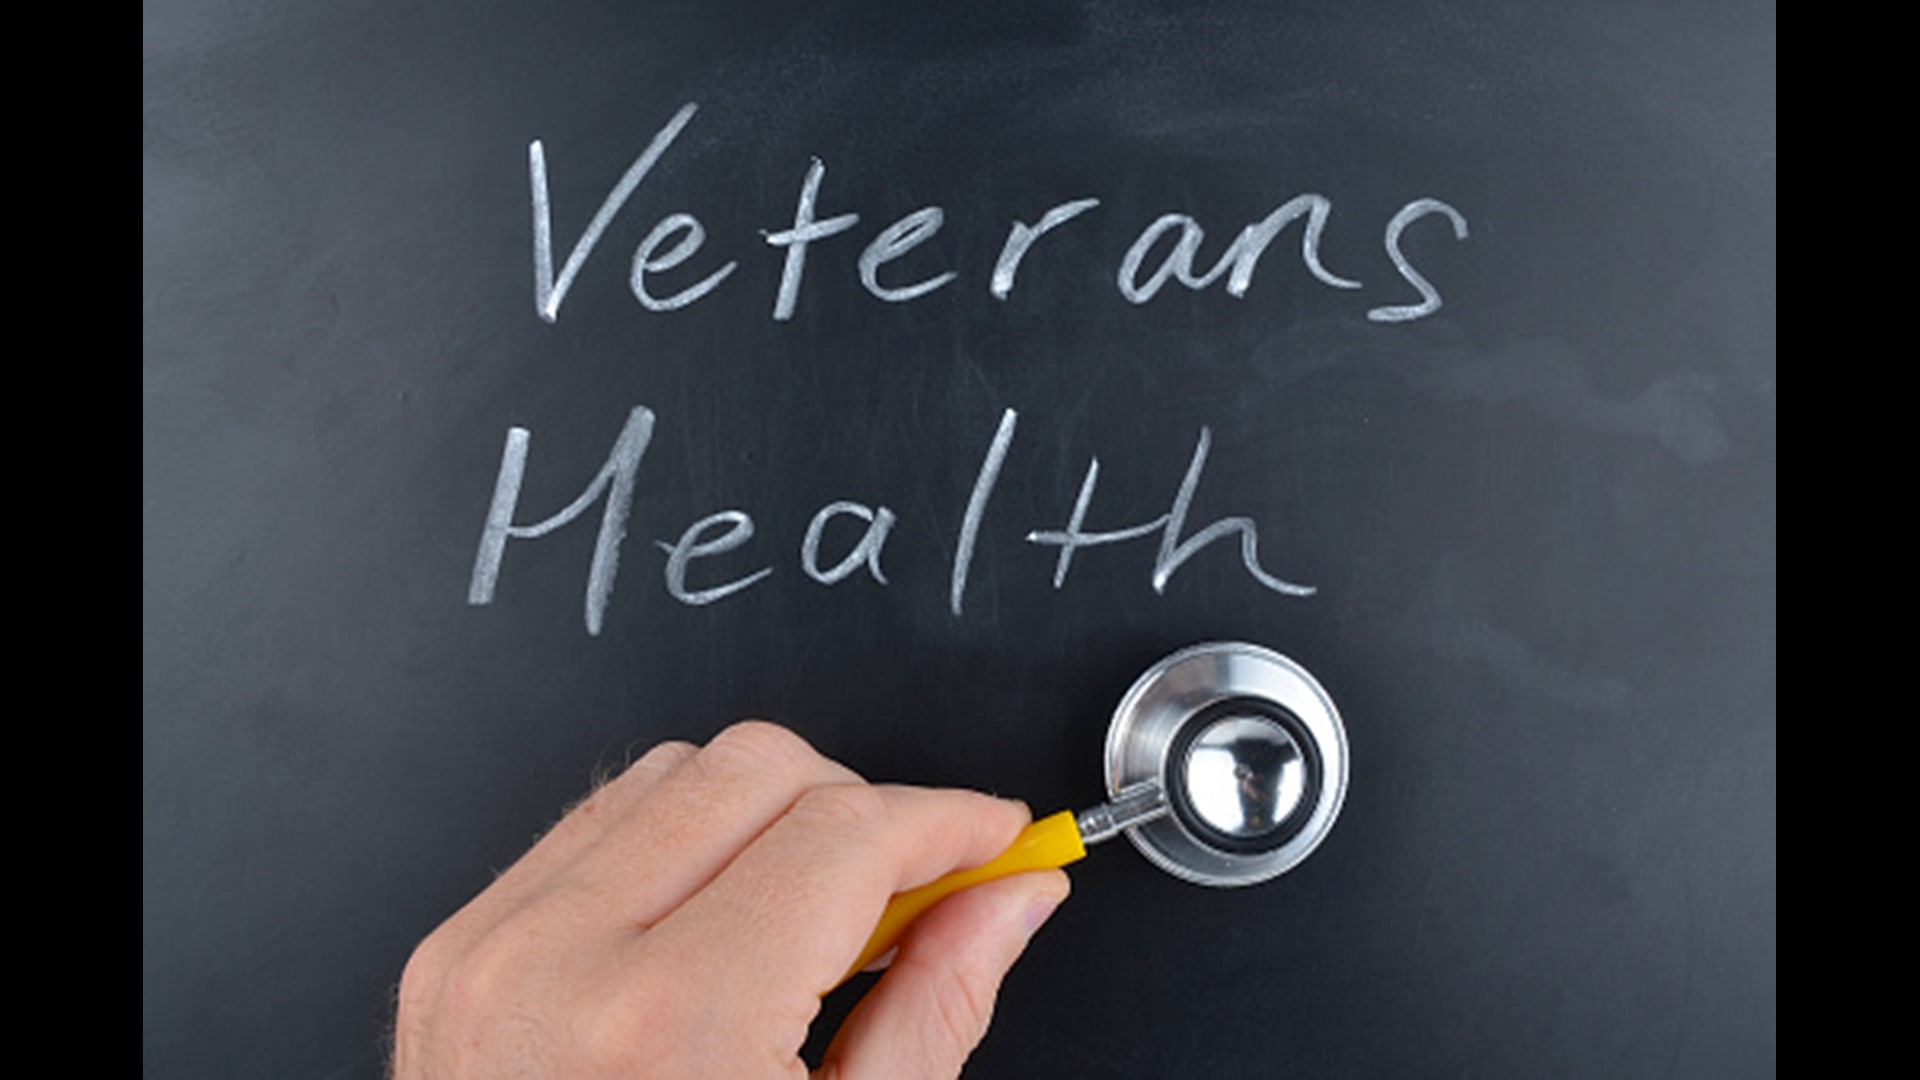 Support teams are currently reaching out to veterans who qualify to schedule them for appointments.